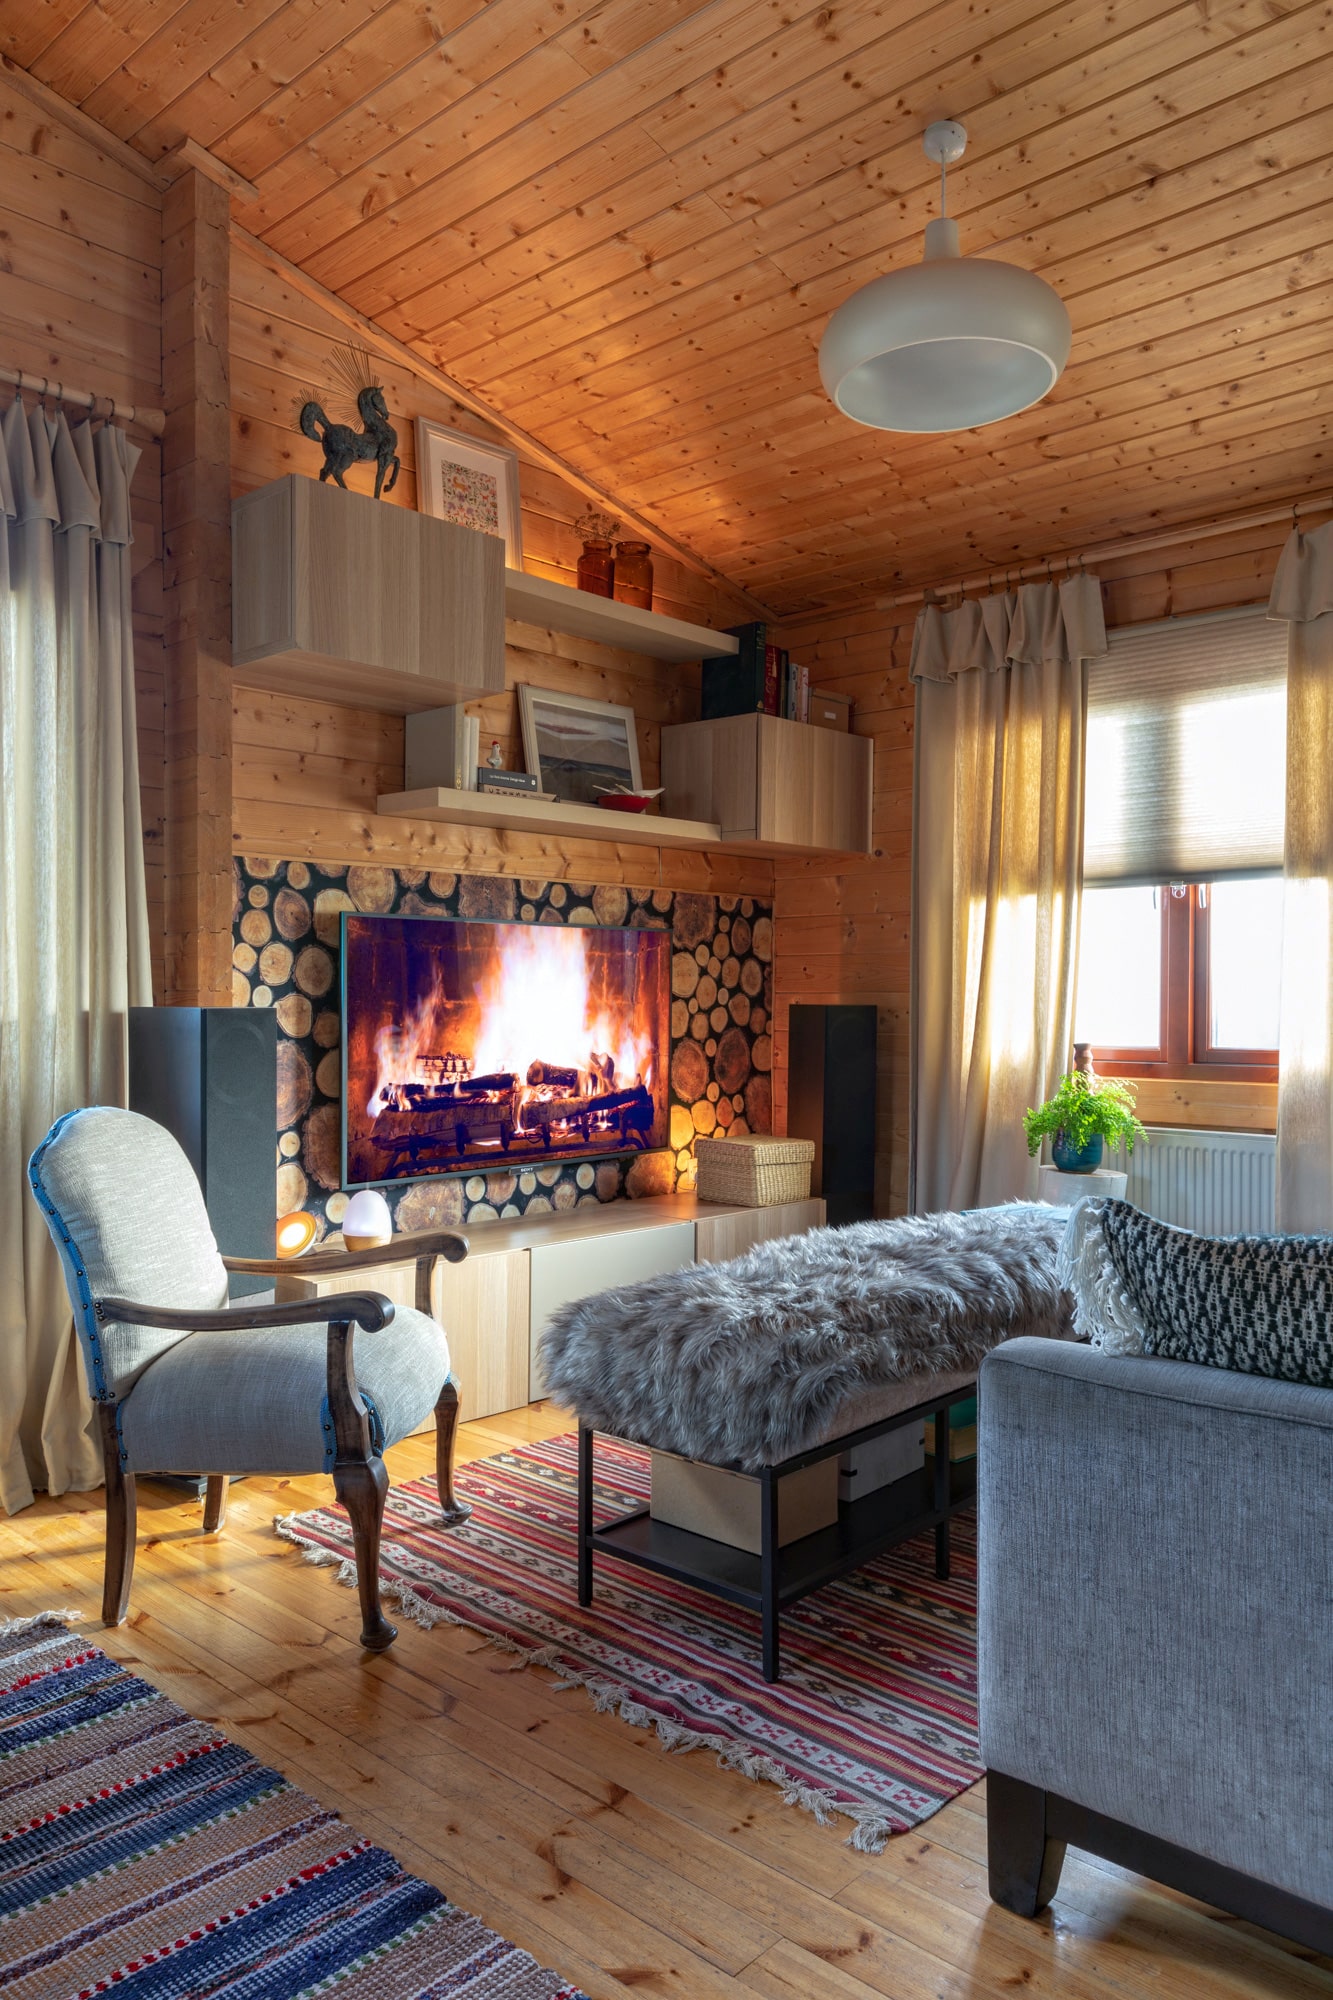 Interior photo of a log cabin: living room; tv with a fireplace lockscreen, a blue sofa, blue armchair